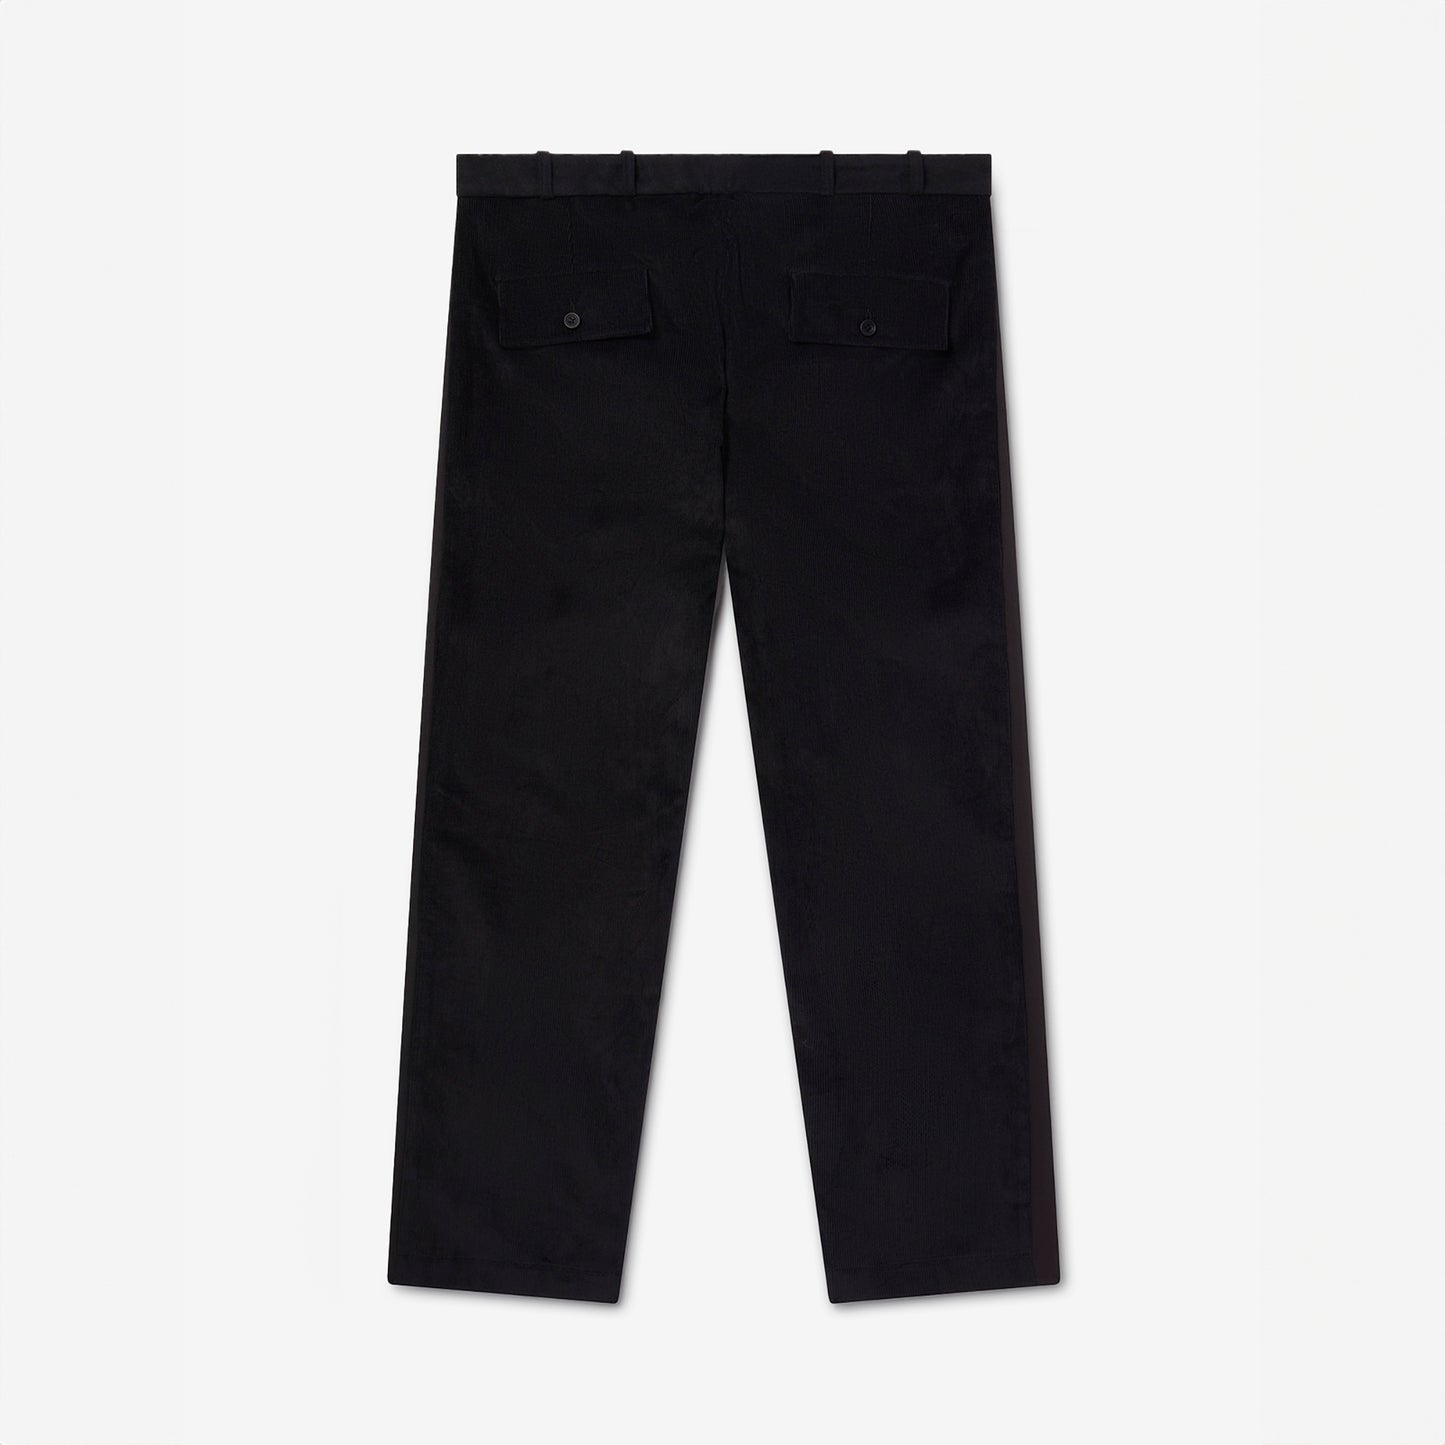 MOSES PANEL PANTS BLACK WOOL CASHMERE CORD